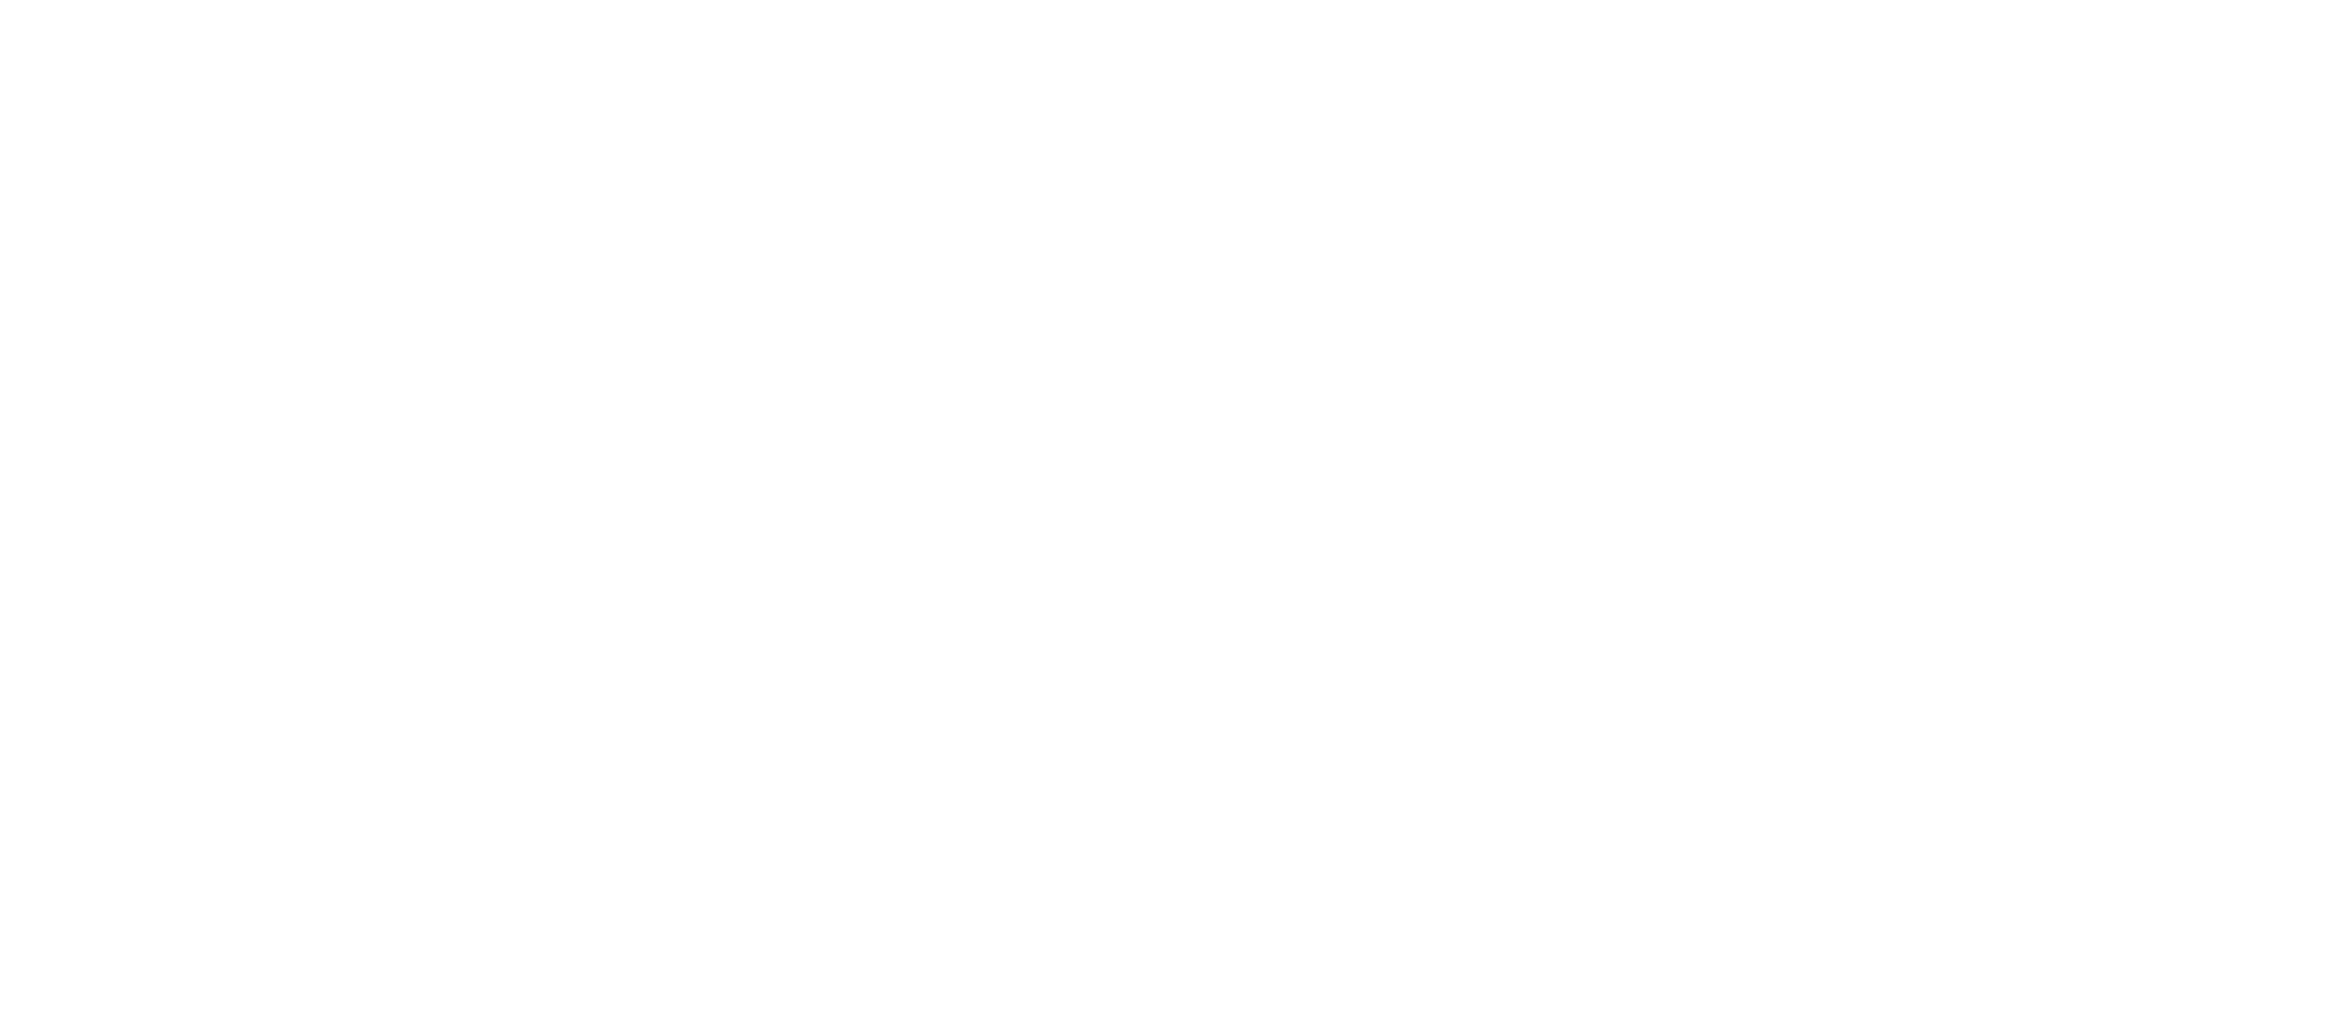 Monty Python: Almost the Truth (The Lawyer's Cut) logo